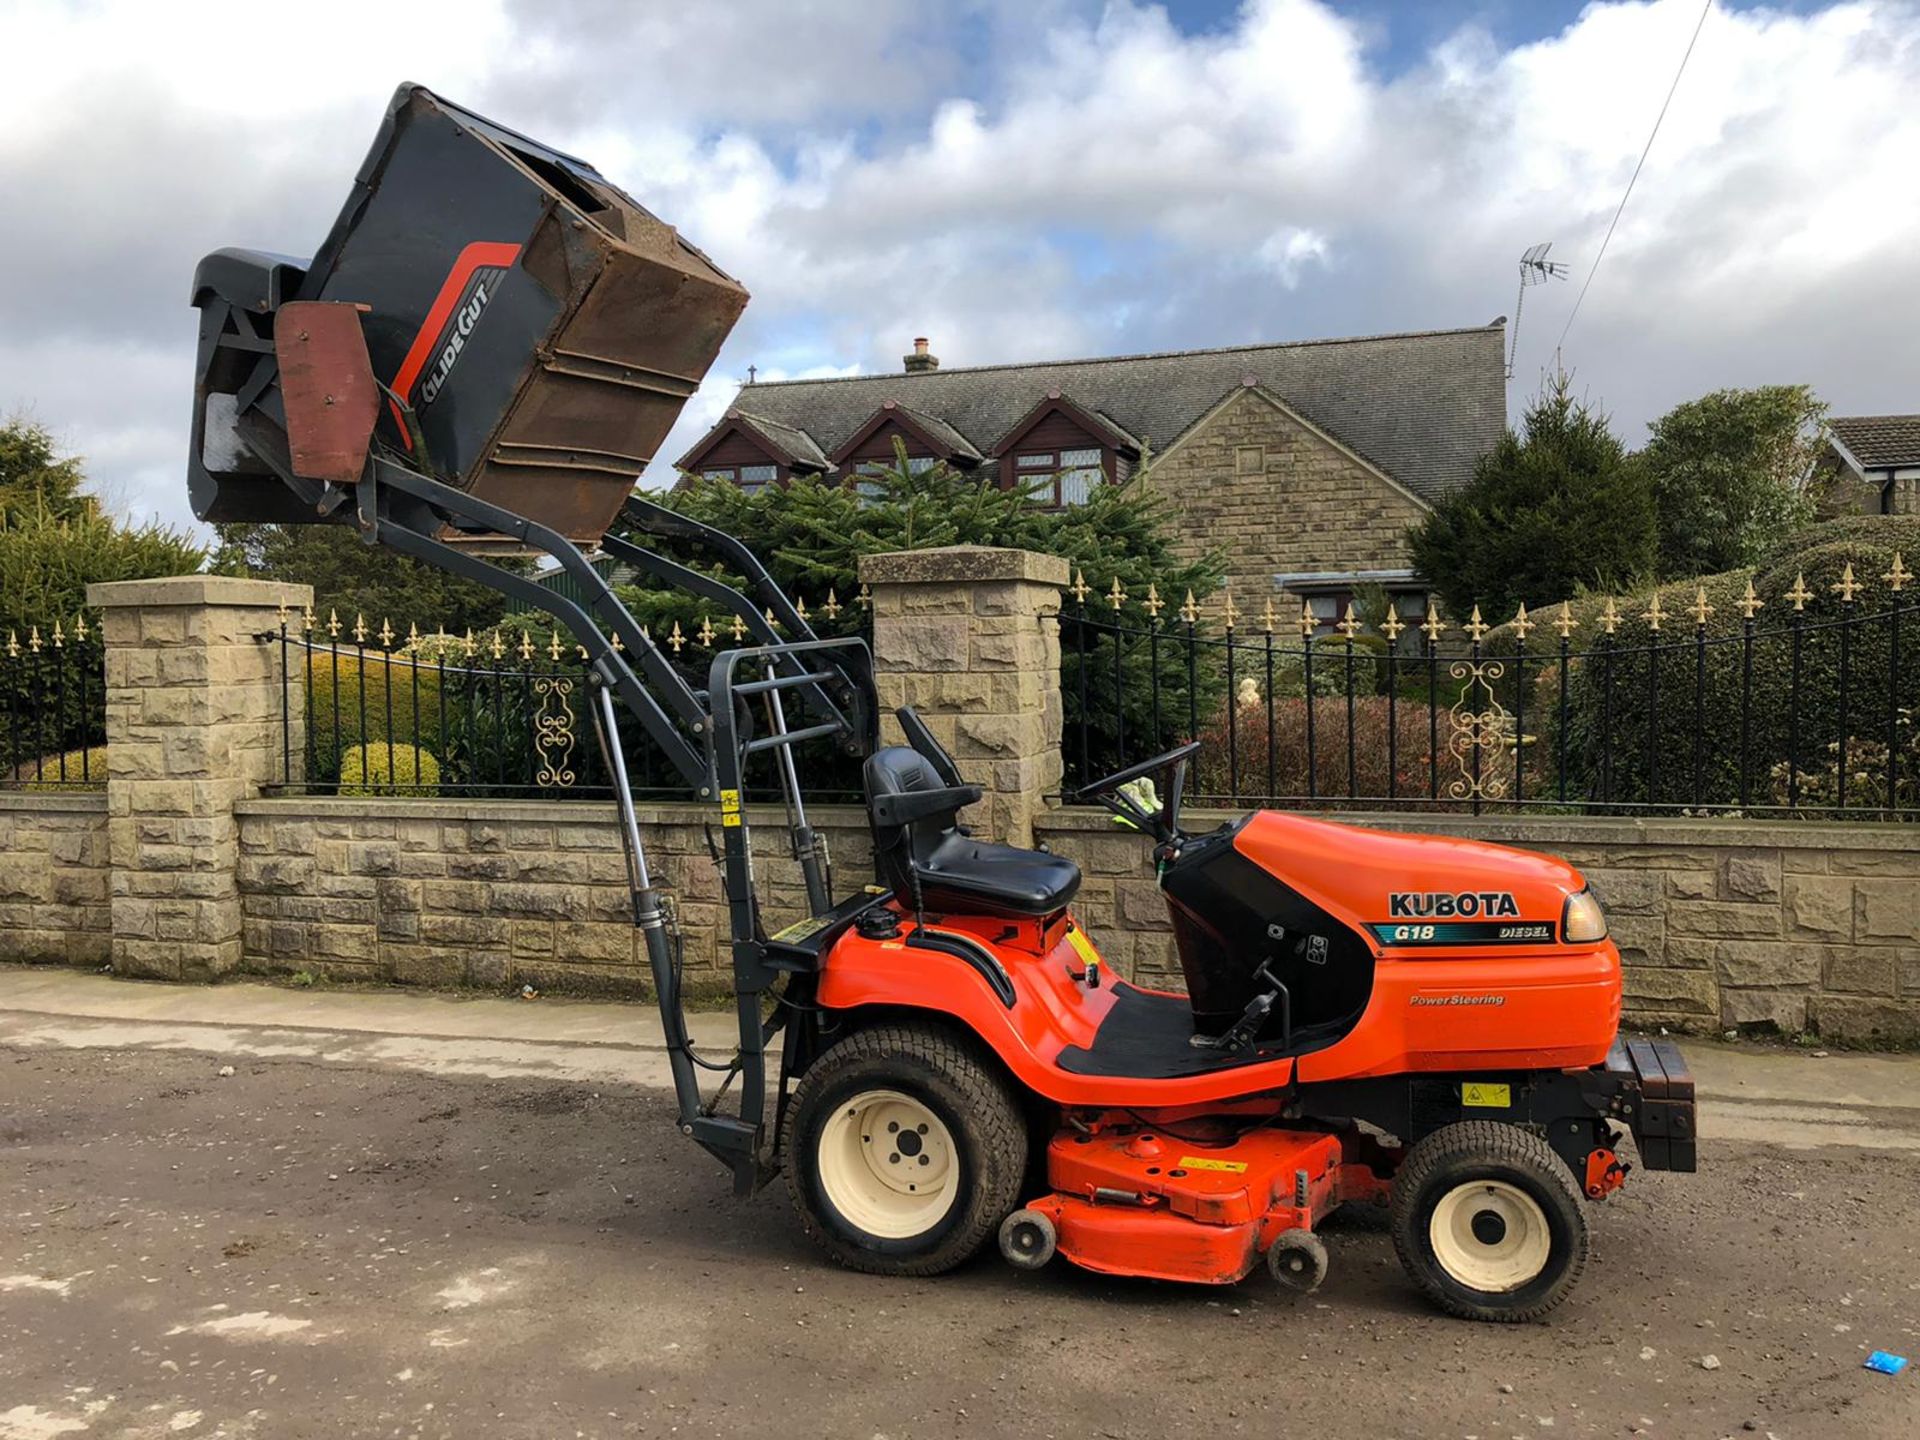 KUBOTA G18 HIGH LIFT RIDE ON LAWN MOWER, POWER STEERING, HIGH LIFT GRASS COLLECTOR, LOW HOURS